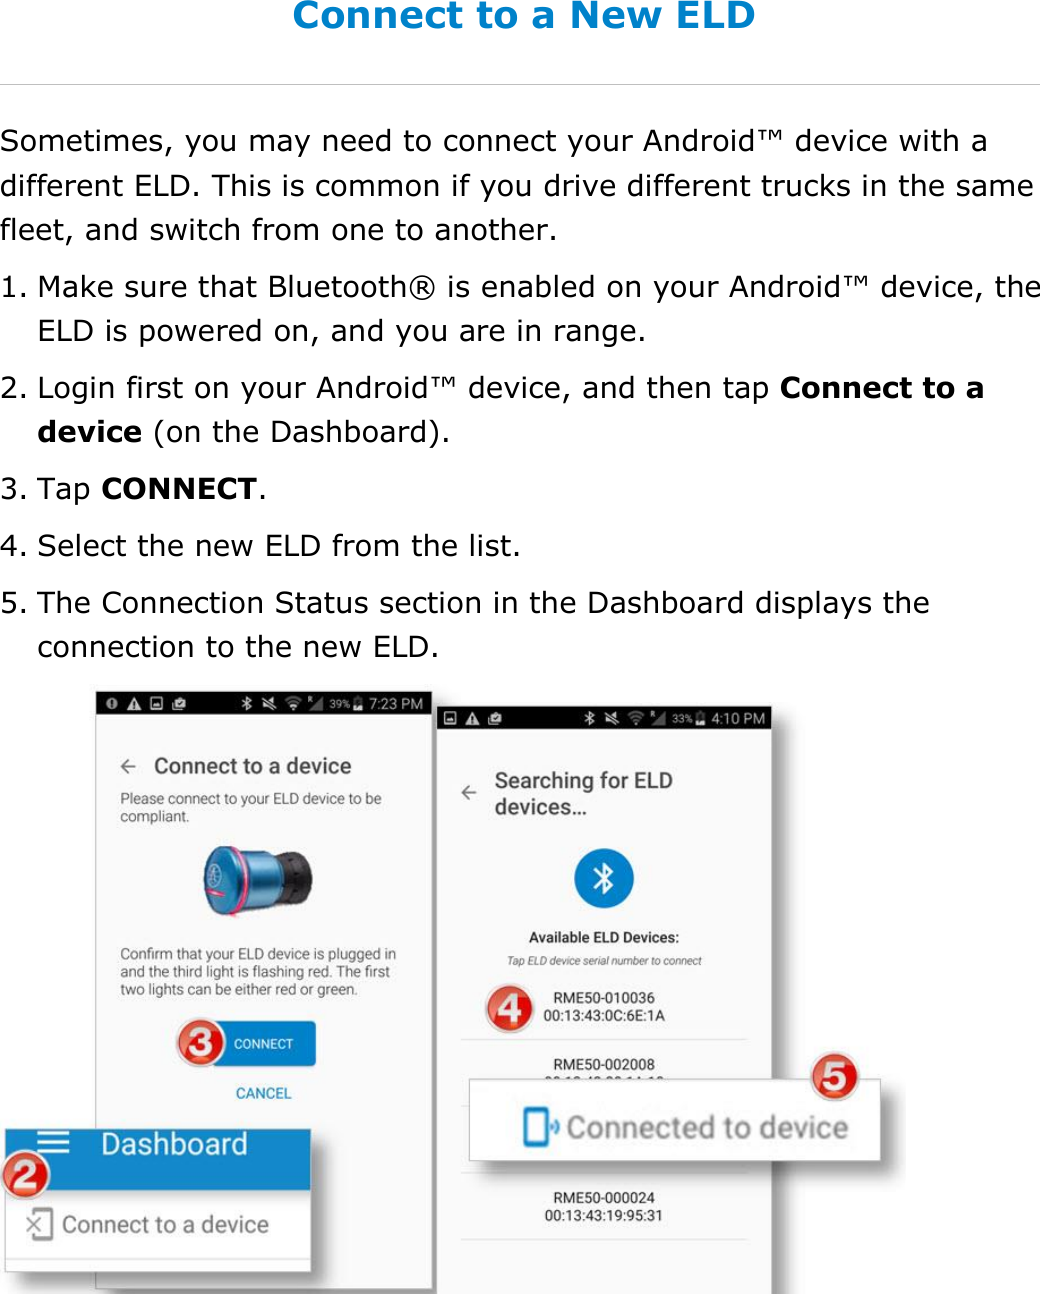 Set My Duty Status DriverConnect User Guide  18 © 2017, Rand McNally, Inc. Connect to a New ELD Sometimes, you may need to connect your Android™ device with a different ELD. This is common if you drive different trucks in the same fleet, and switch from one to another. 1. Make sure that Bluetooth® is enabled on your Android™ device, the ELD is powered on, and you are in range. 2. Login first on your Android™ device, and then tap Connect to a device (on the Dashboard). 3. Tap CONNECT. 4. Select the new ELD from the list. 5. The Connection Status section in the Dashboard displays the connection to the new ELD.   